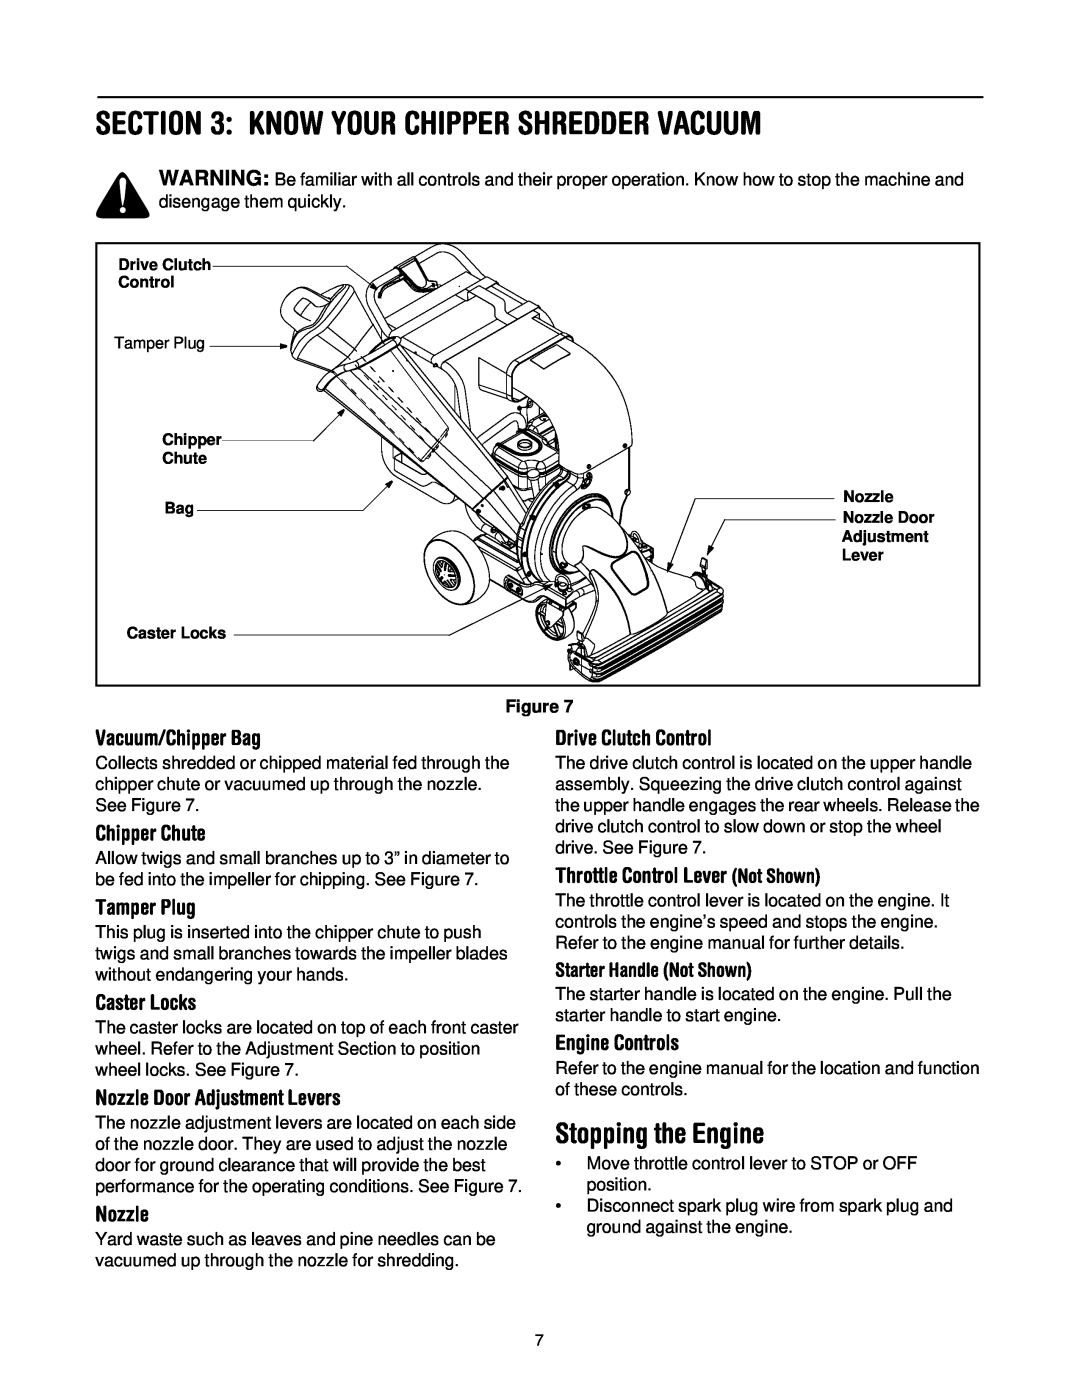 Troy-Bilt CSV206 Know Your Chipper Shredder Vacuum, Stopping the Engine, Vacuum/Chipper Bag, Chipper Chute, Tamper Plug 